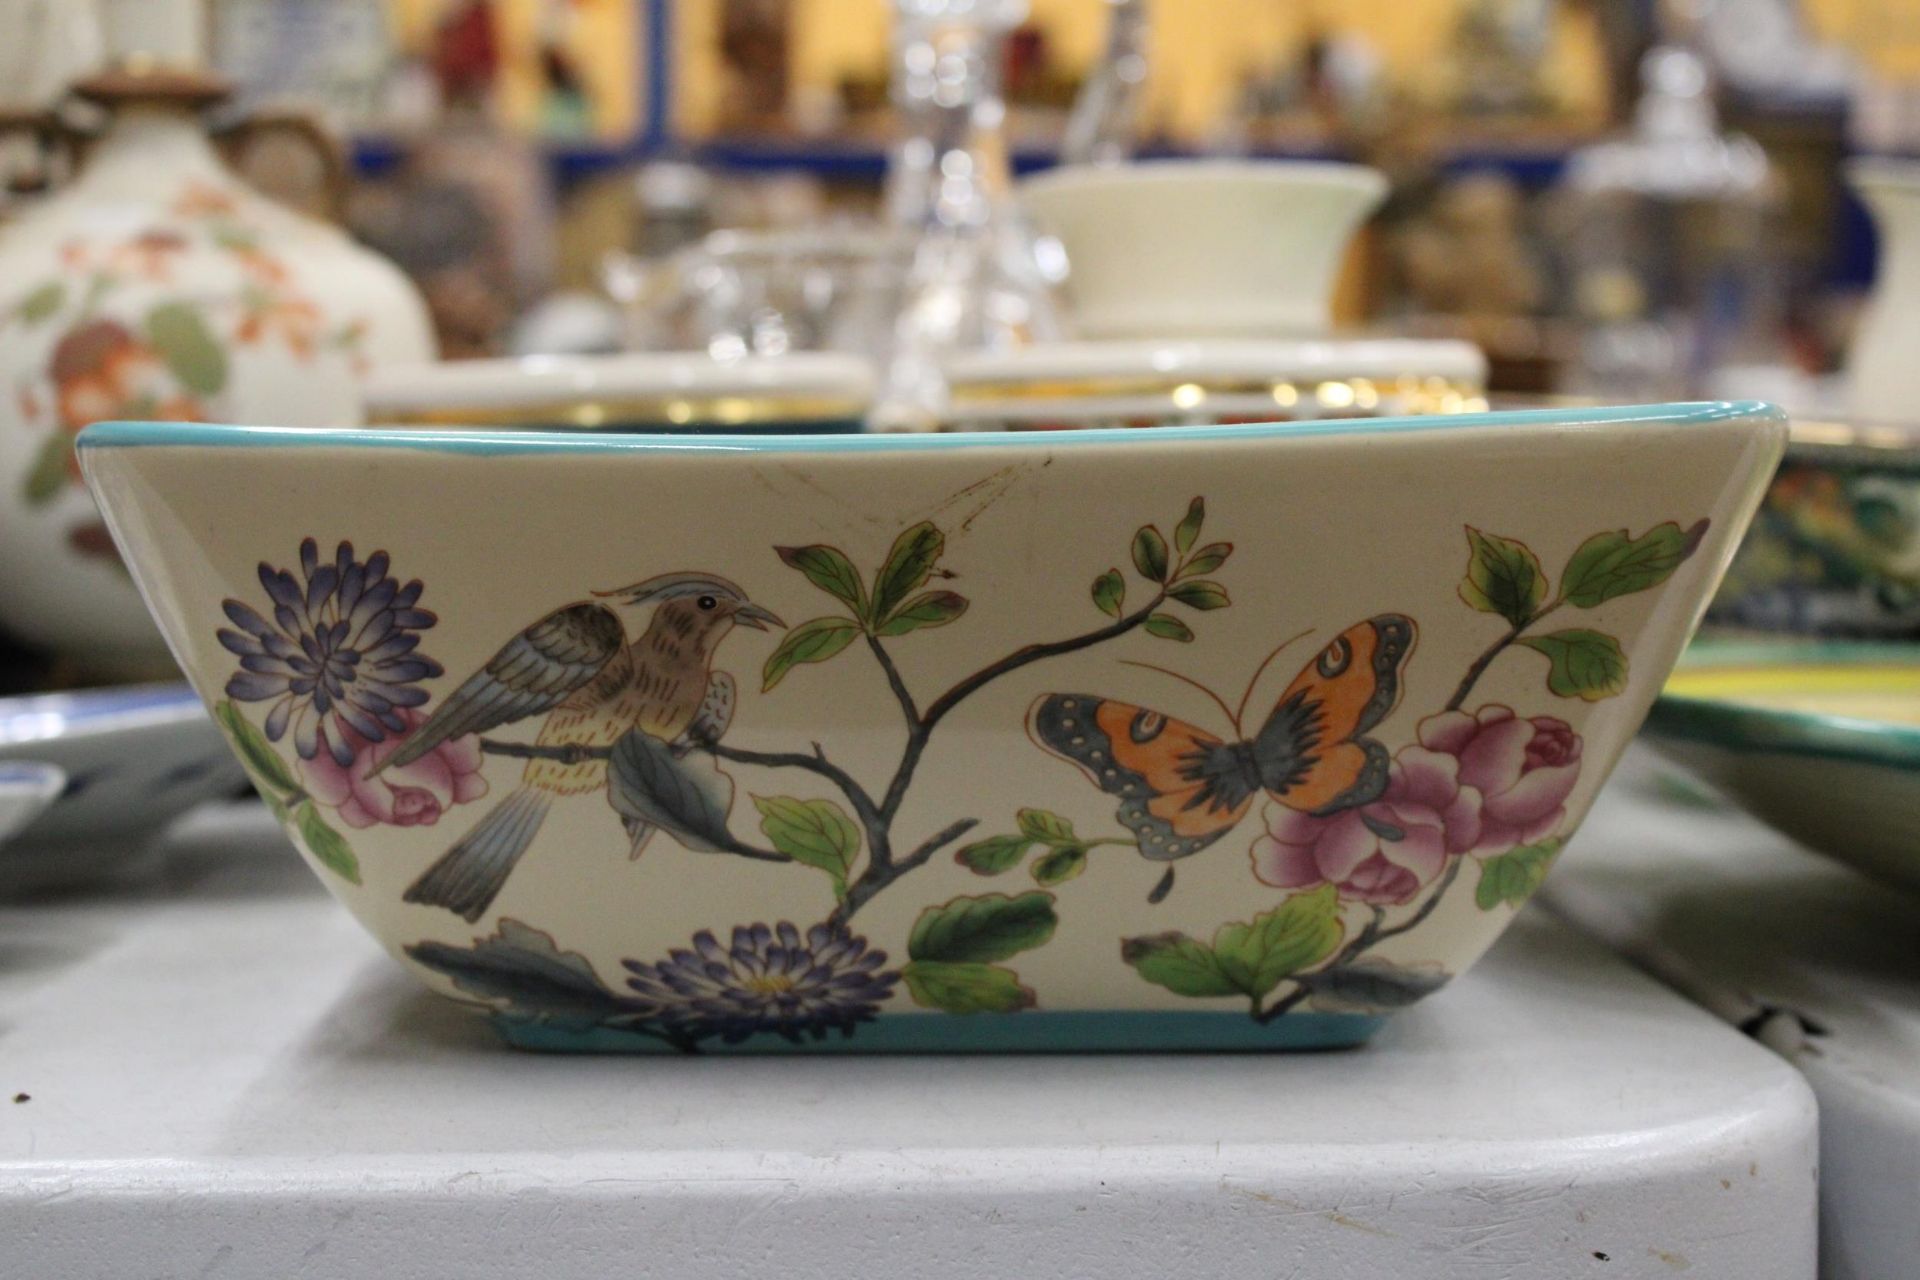 TWO CROWN DEVON PLANT HOLDERS, A LARGE FLORAL AND BIRD DECORATED BOWL, WEDGWOOD VASE, GLASS DECANTER - Image 2 of 6